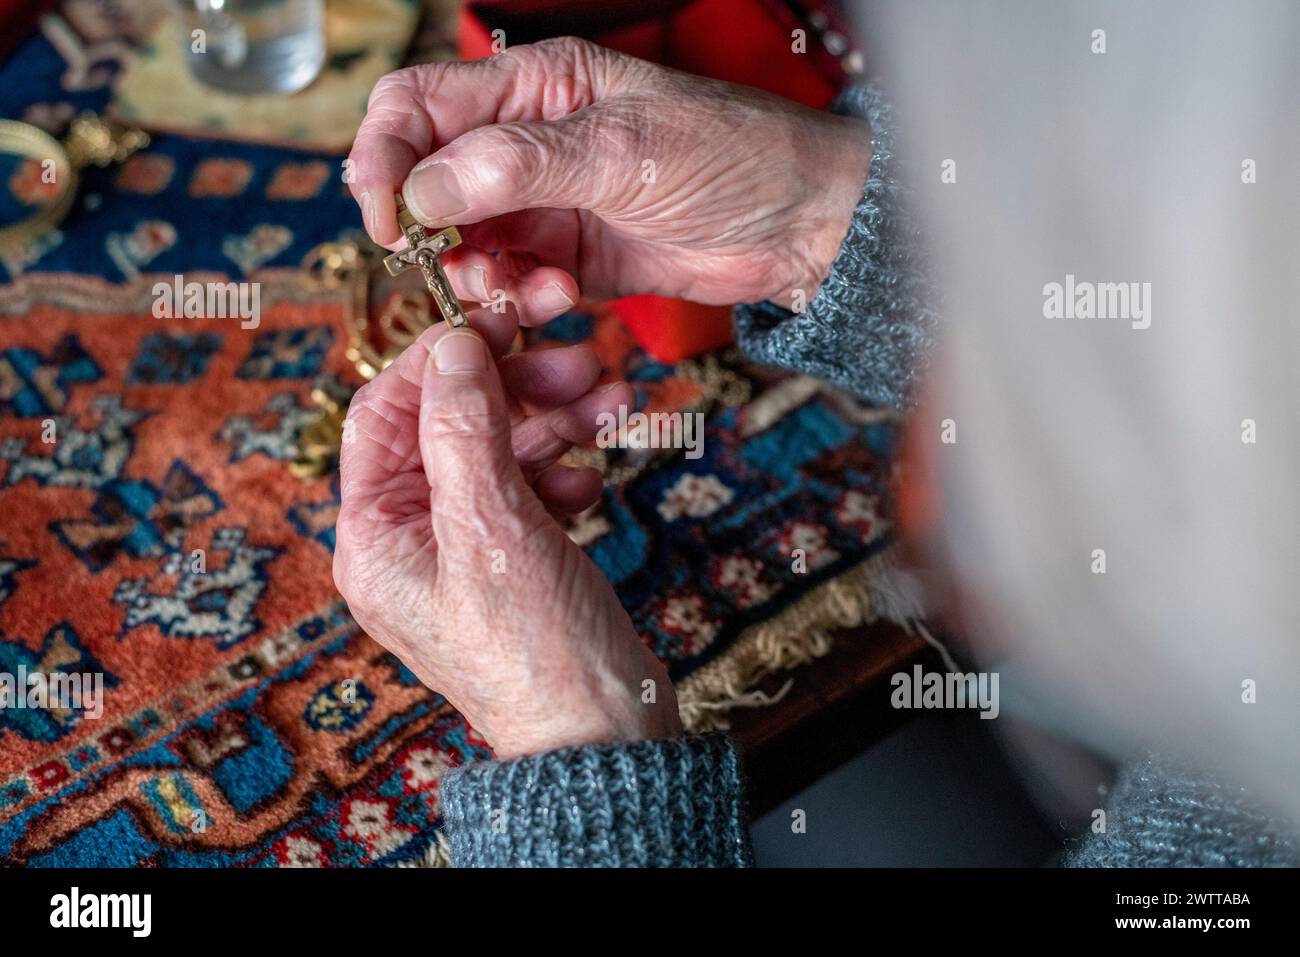 Elderly hands delicately holding a small object with a warm and cozy background Stock Photo